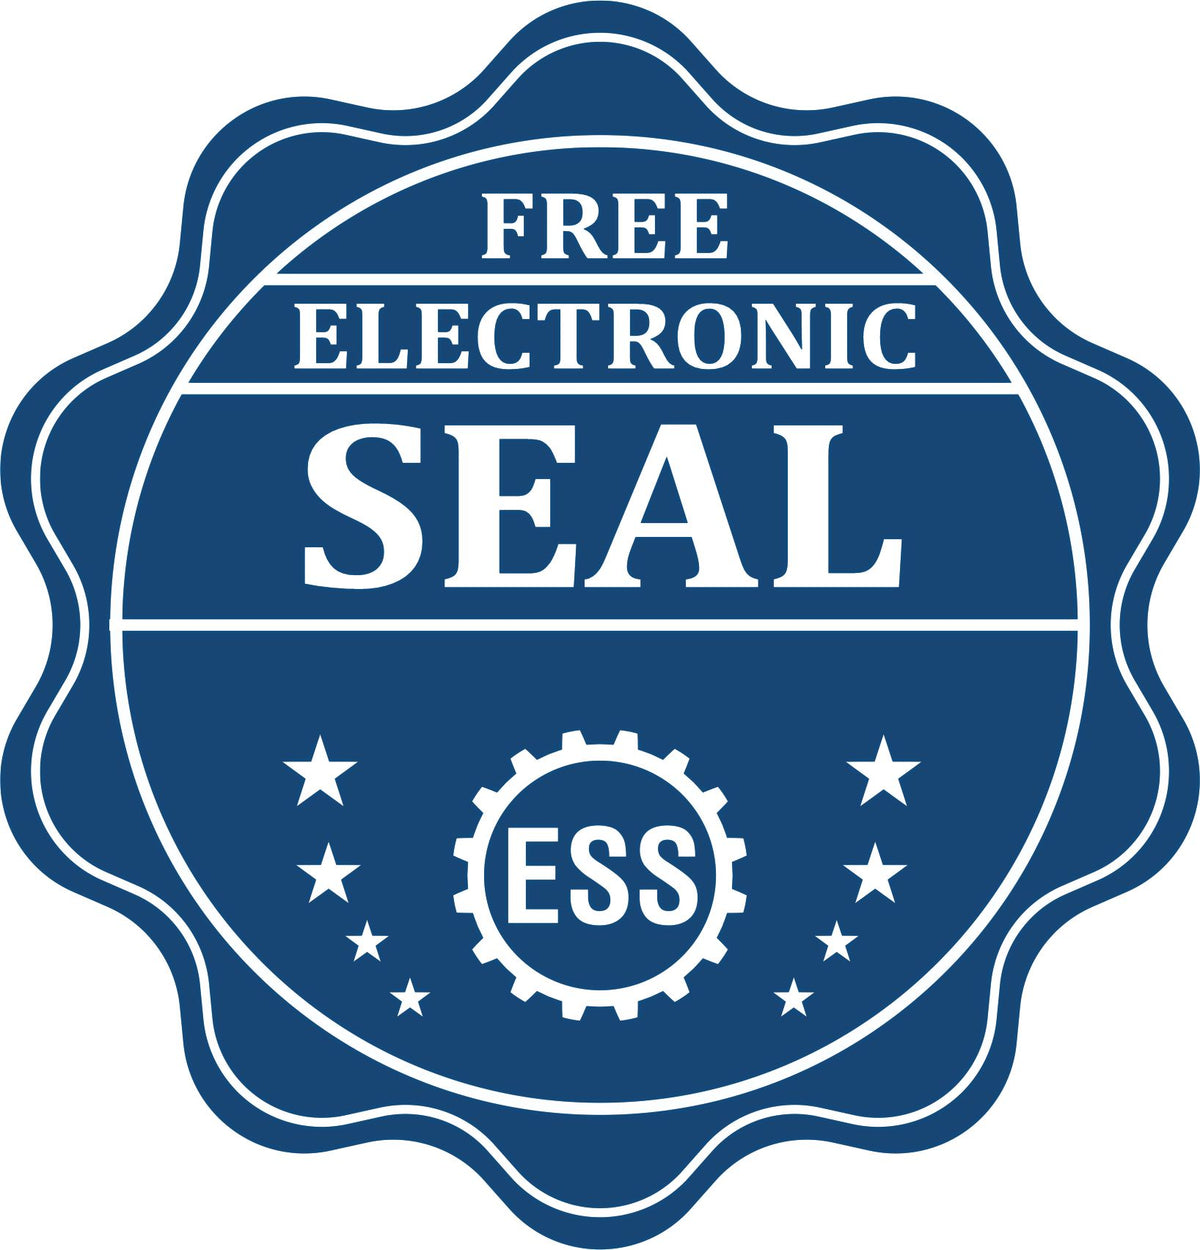 A badge showing a free electronic seal for the Soft Pennsylvania Professional Engineer Seal with stars and the ESS gear on the emblem.